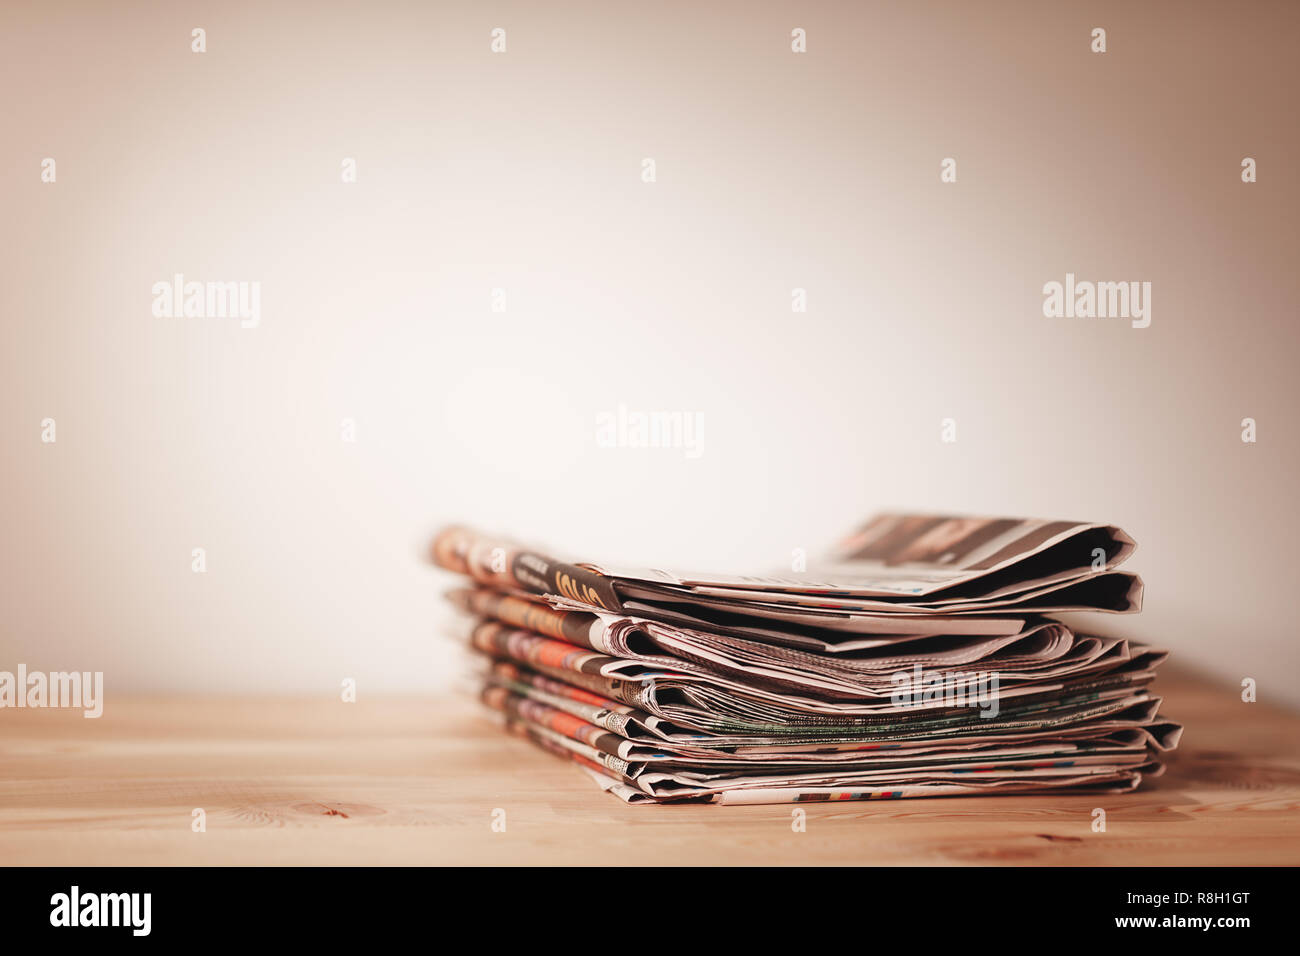 Newspaper on wooden table Stock Photo